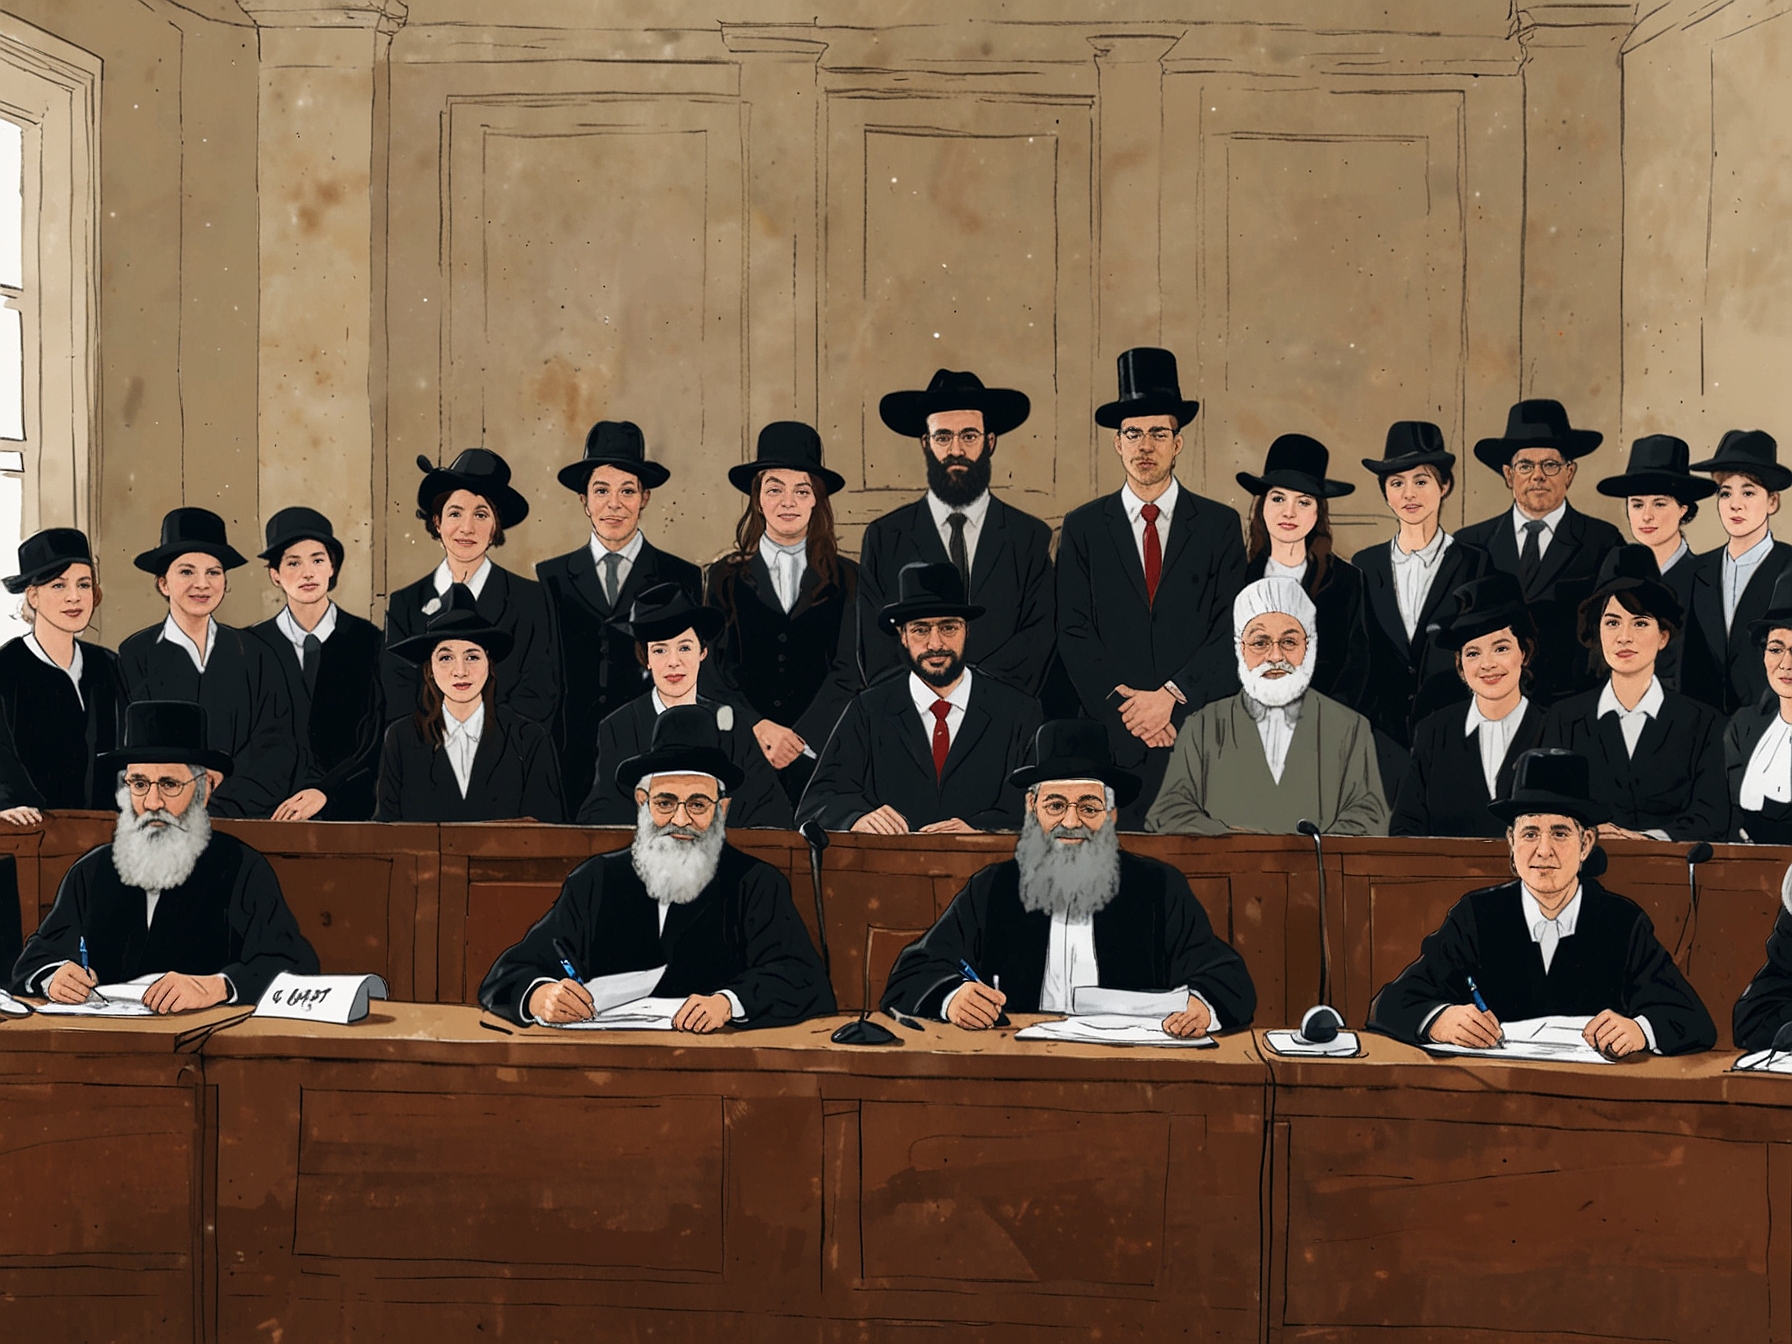 An Israeli Supreme Court judge delivers the landmark ruling, emphasizing the inclusion of ultra-Orthodox Jews in the national military draft amidst ongoing debates on civic equality and religious obligations.